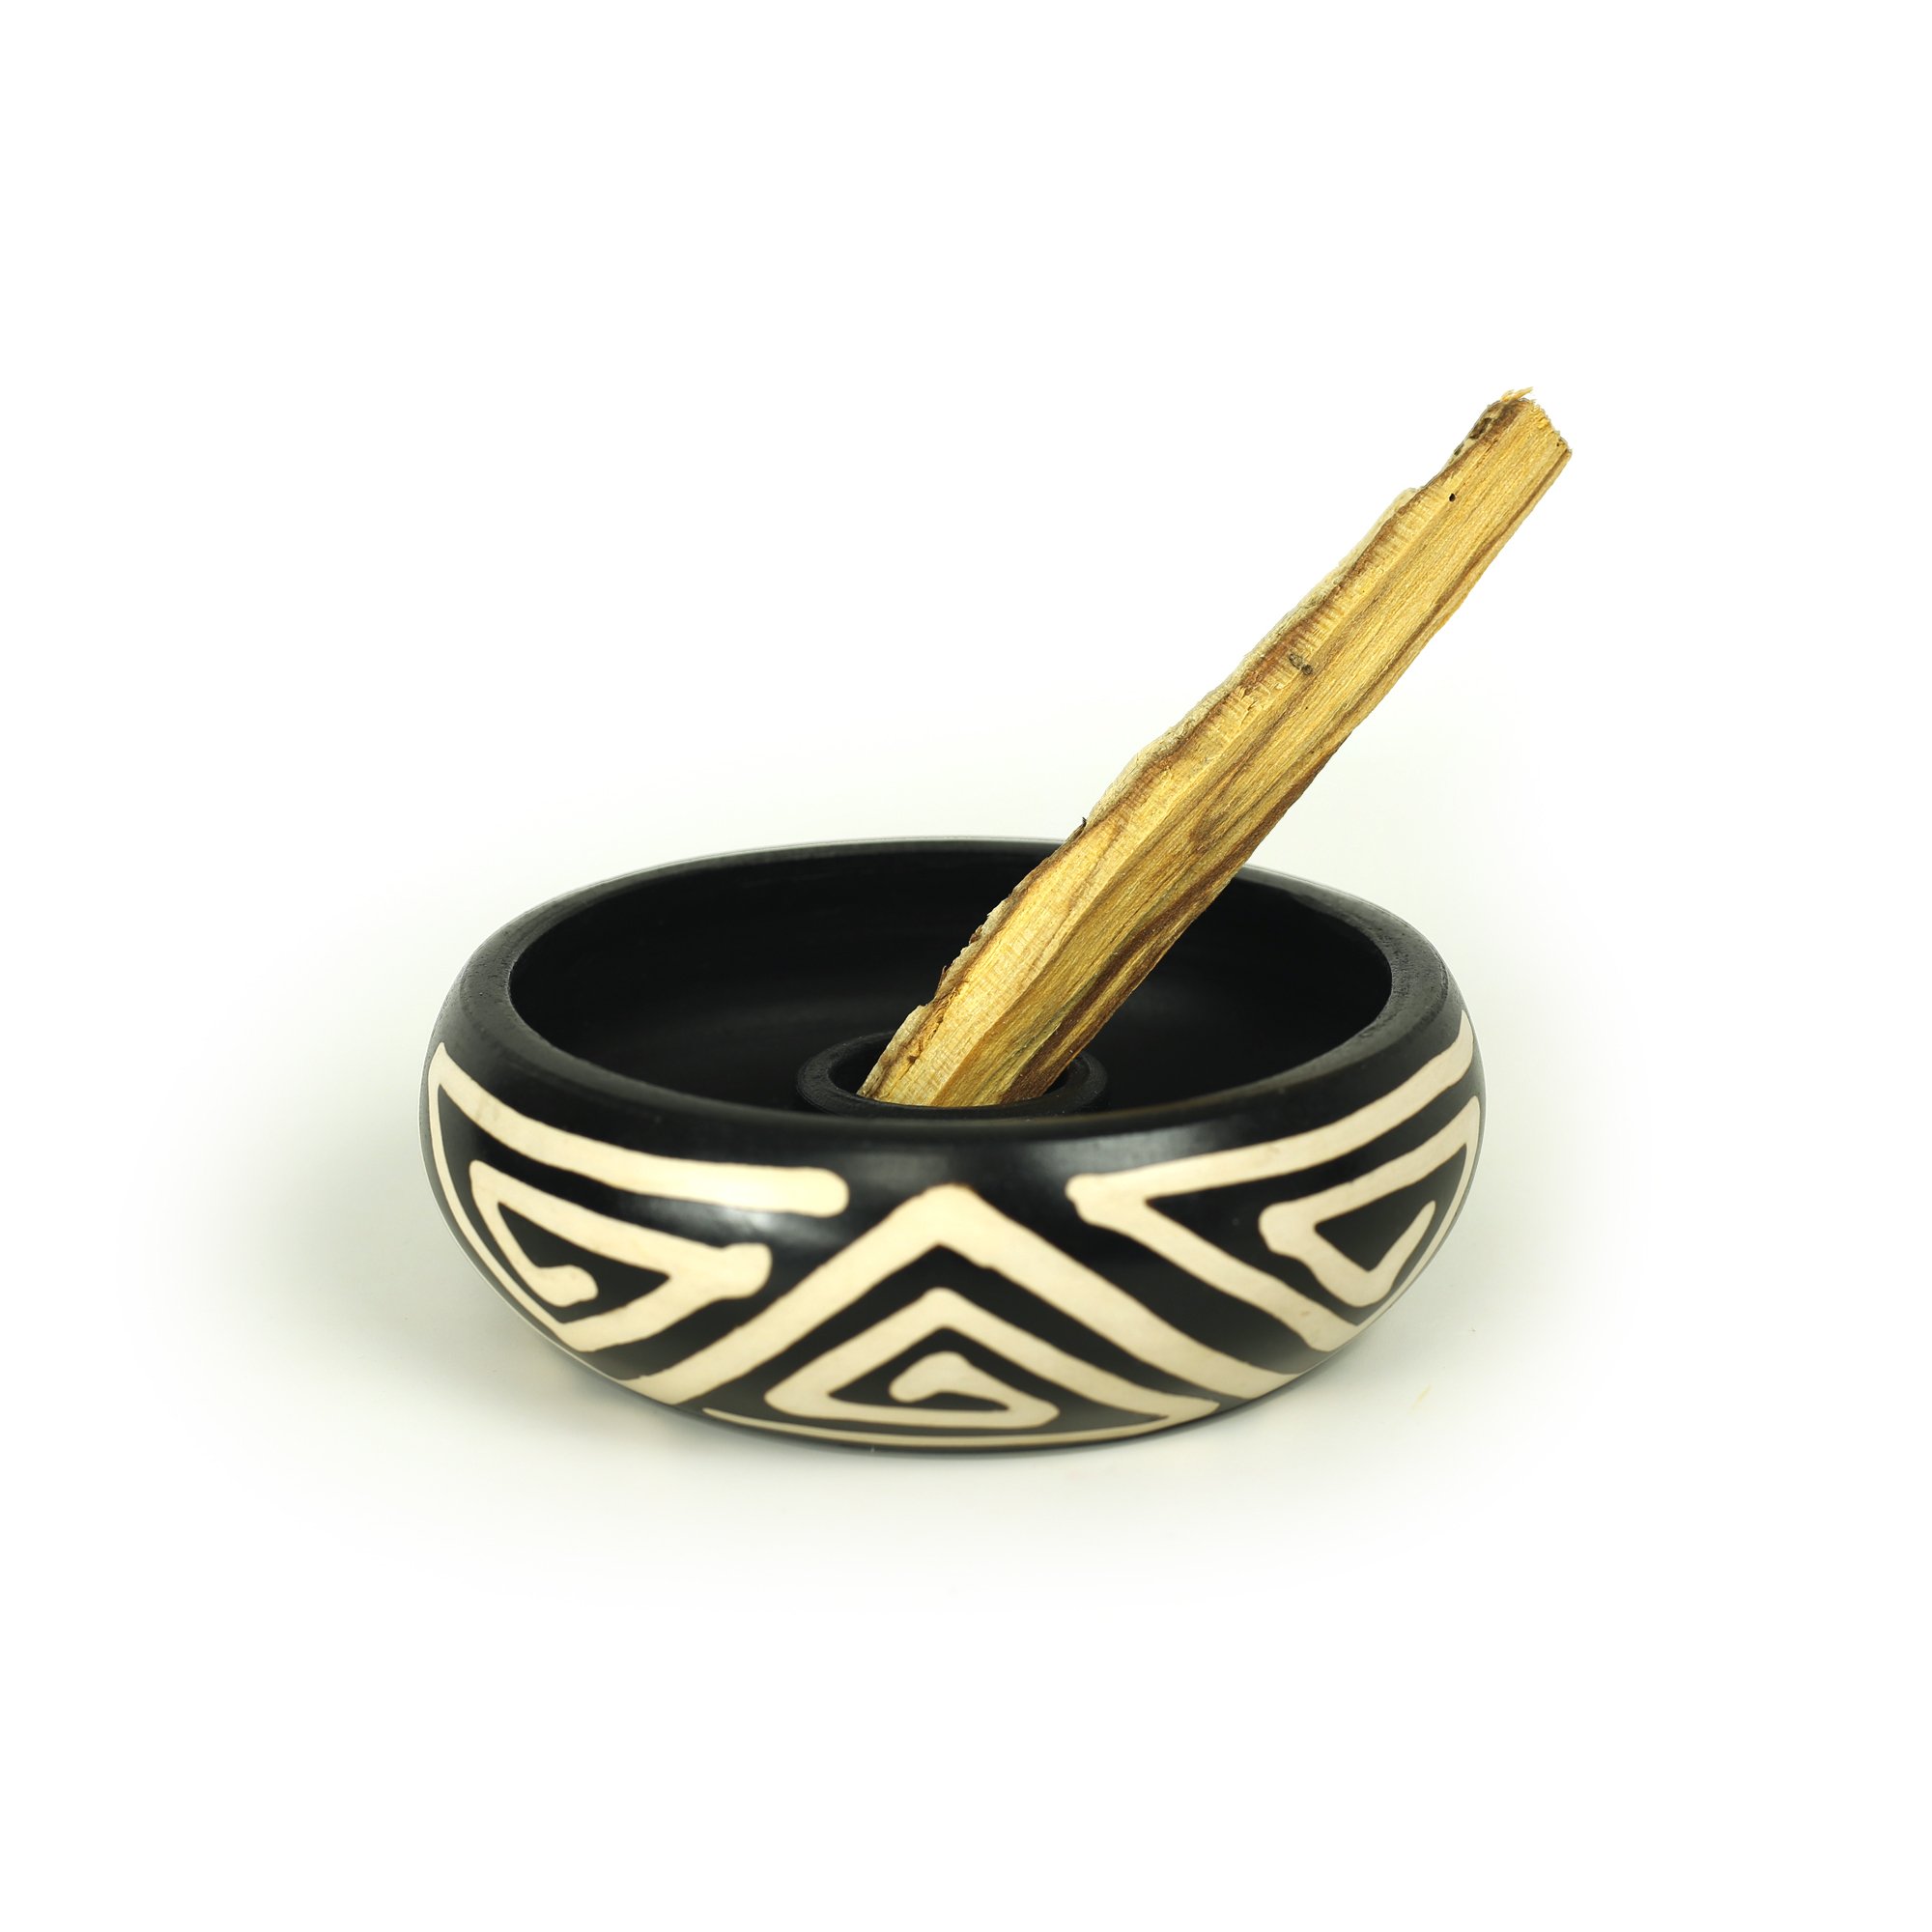 Peruvian Ceramic Incense Burner - Herbs from the Labyrinth